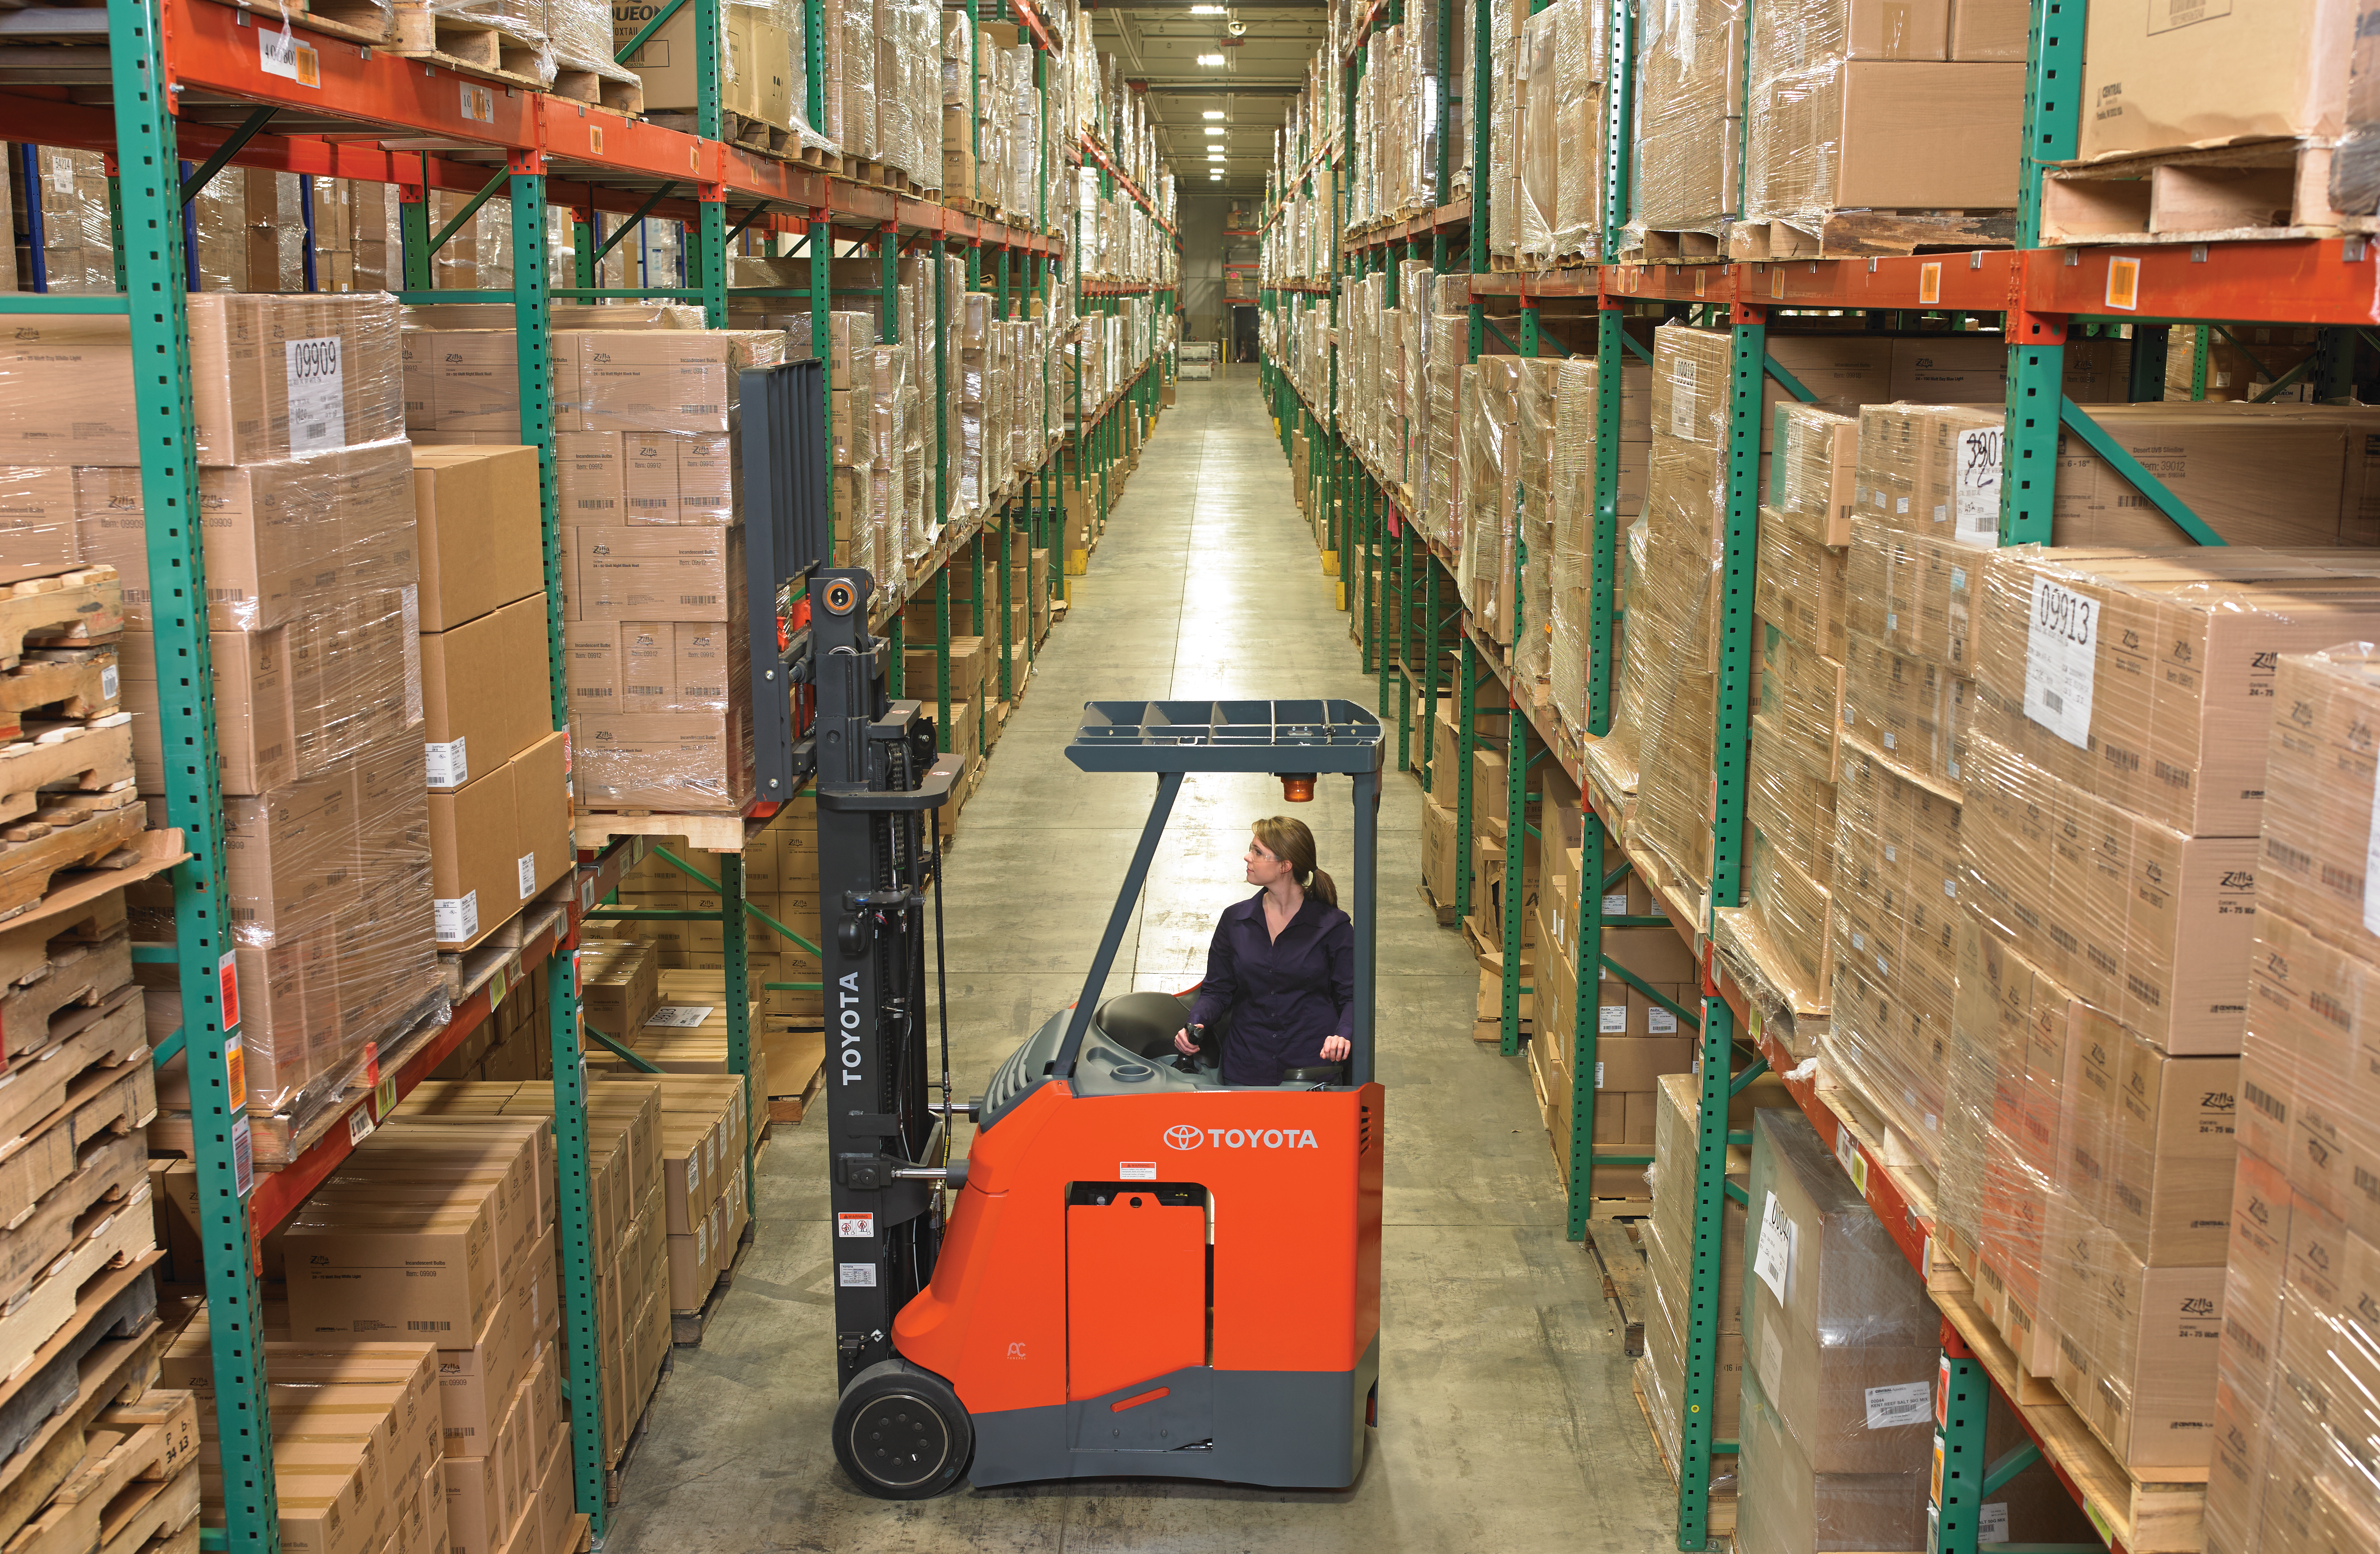 Toyota stand up riding forklift being used in a warehouse